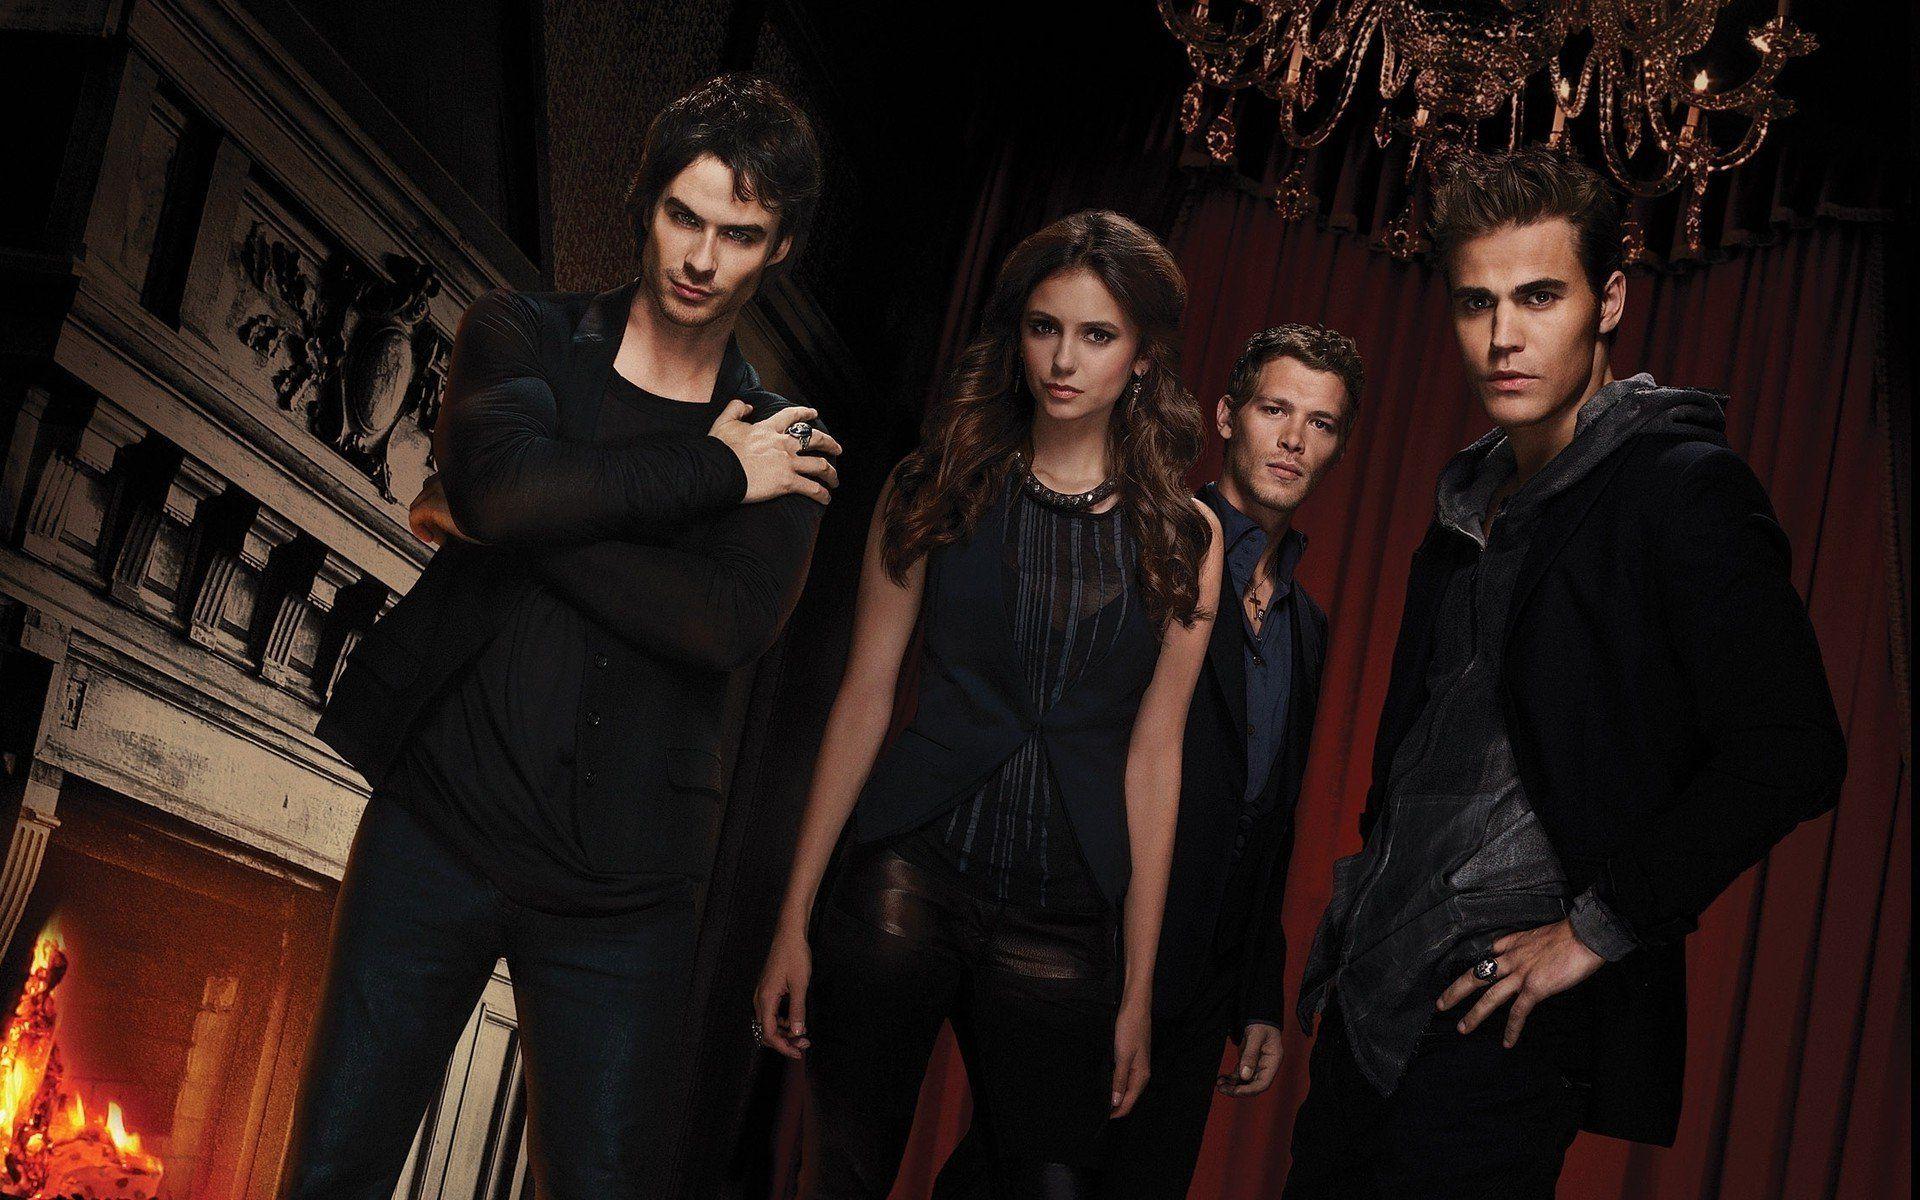 image about The vampire diaries. Vampire